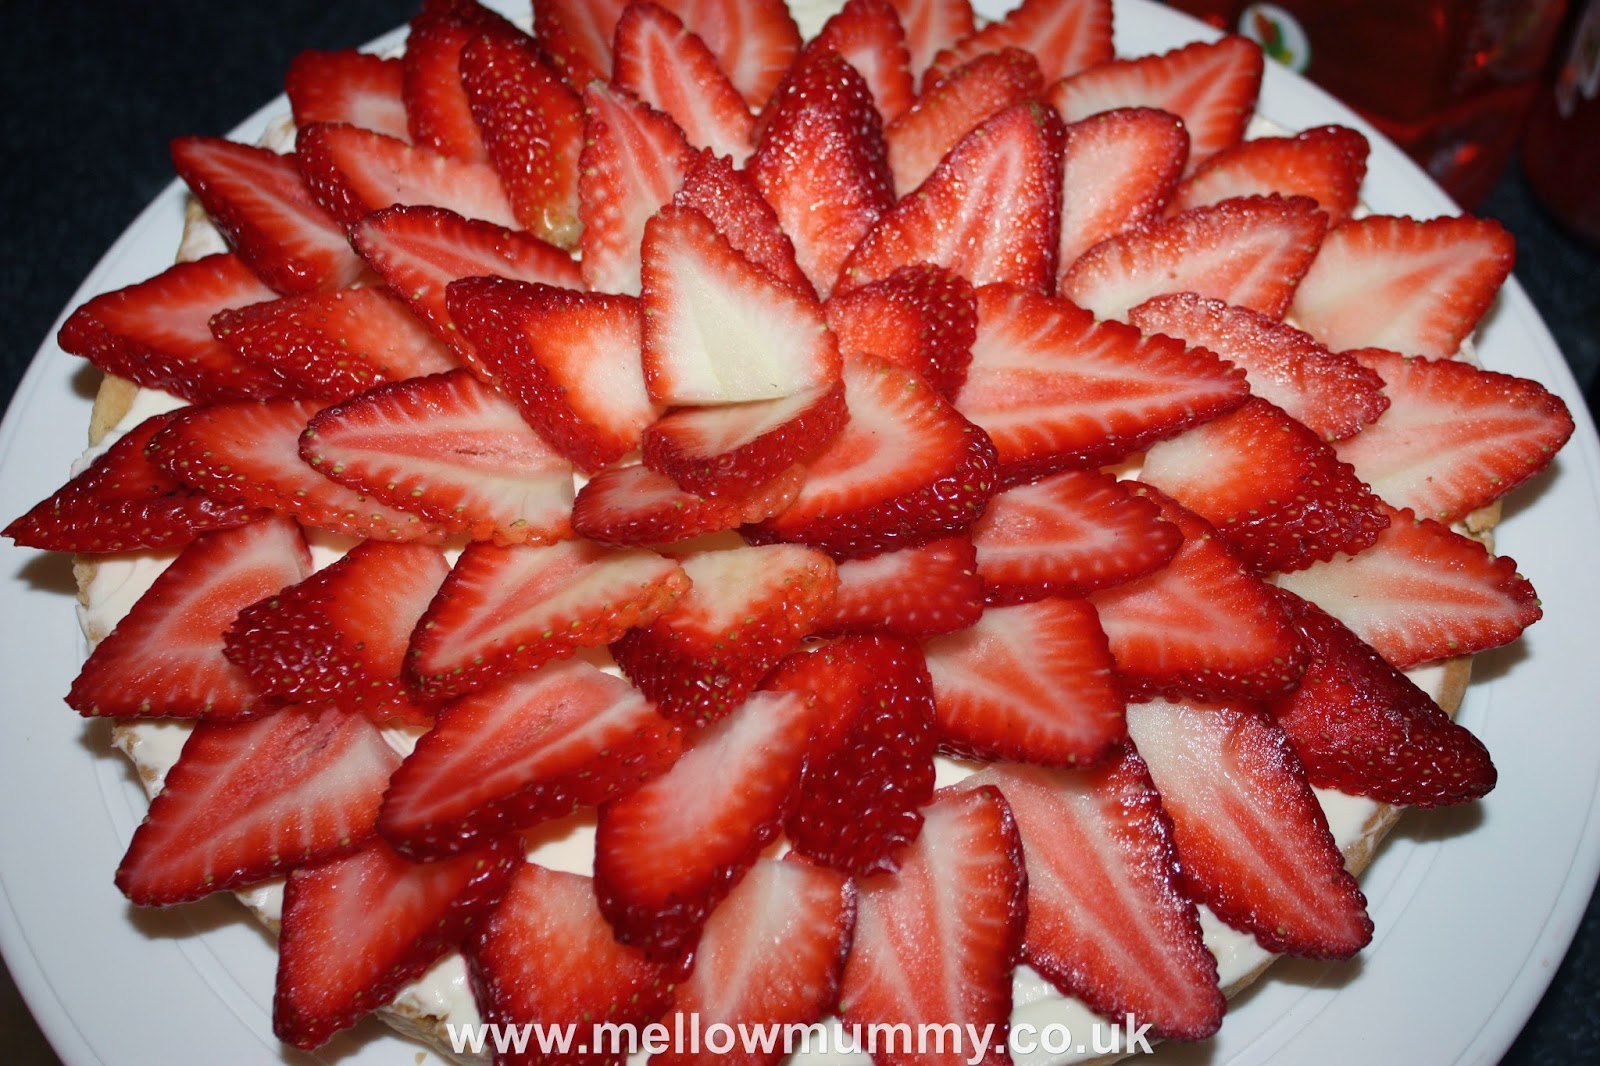 Arranging the Glazed Strawberry and Cream Cheese Tart